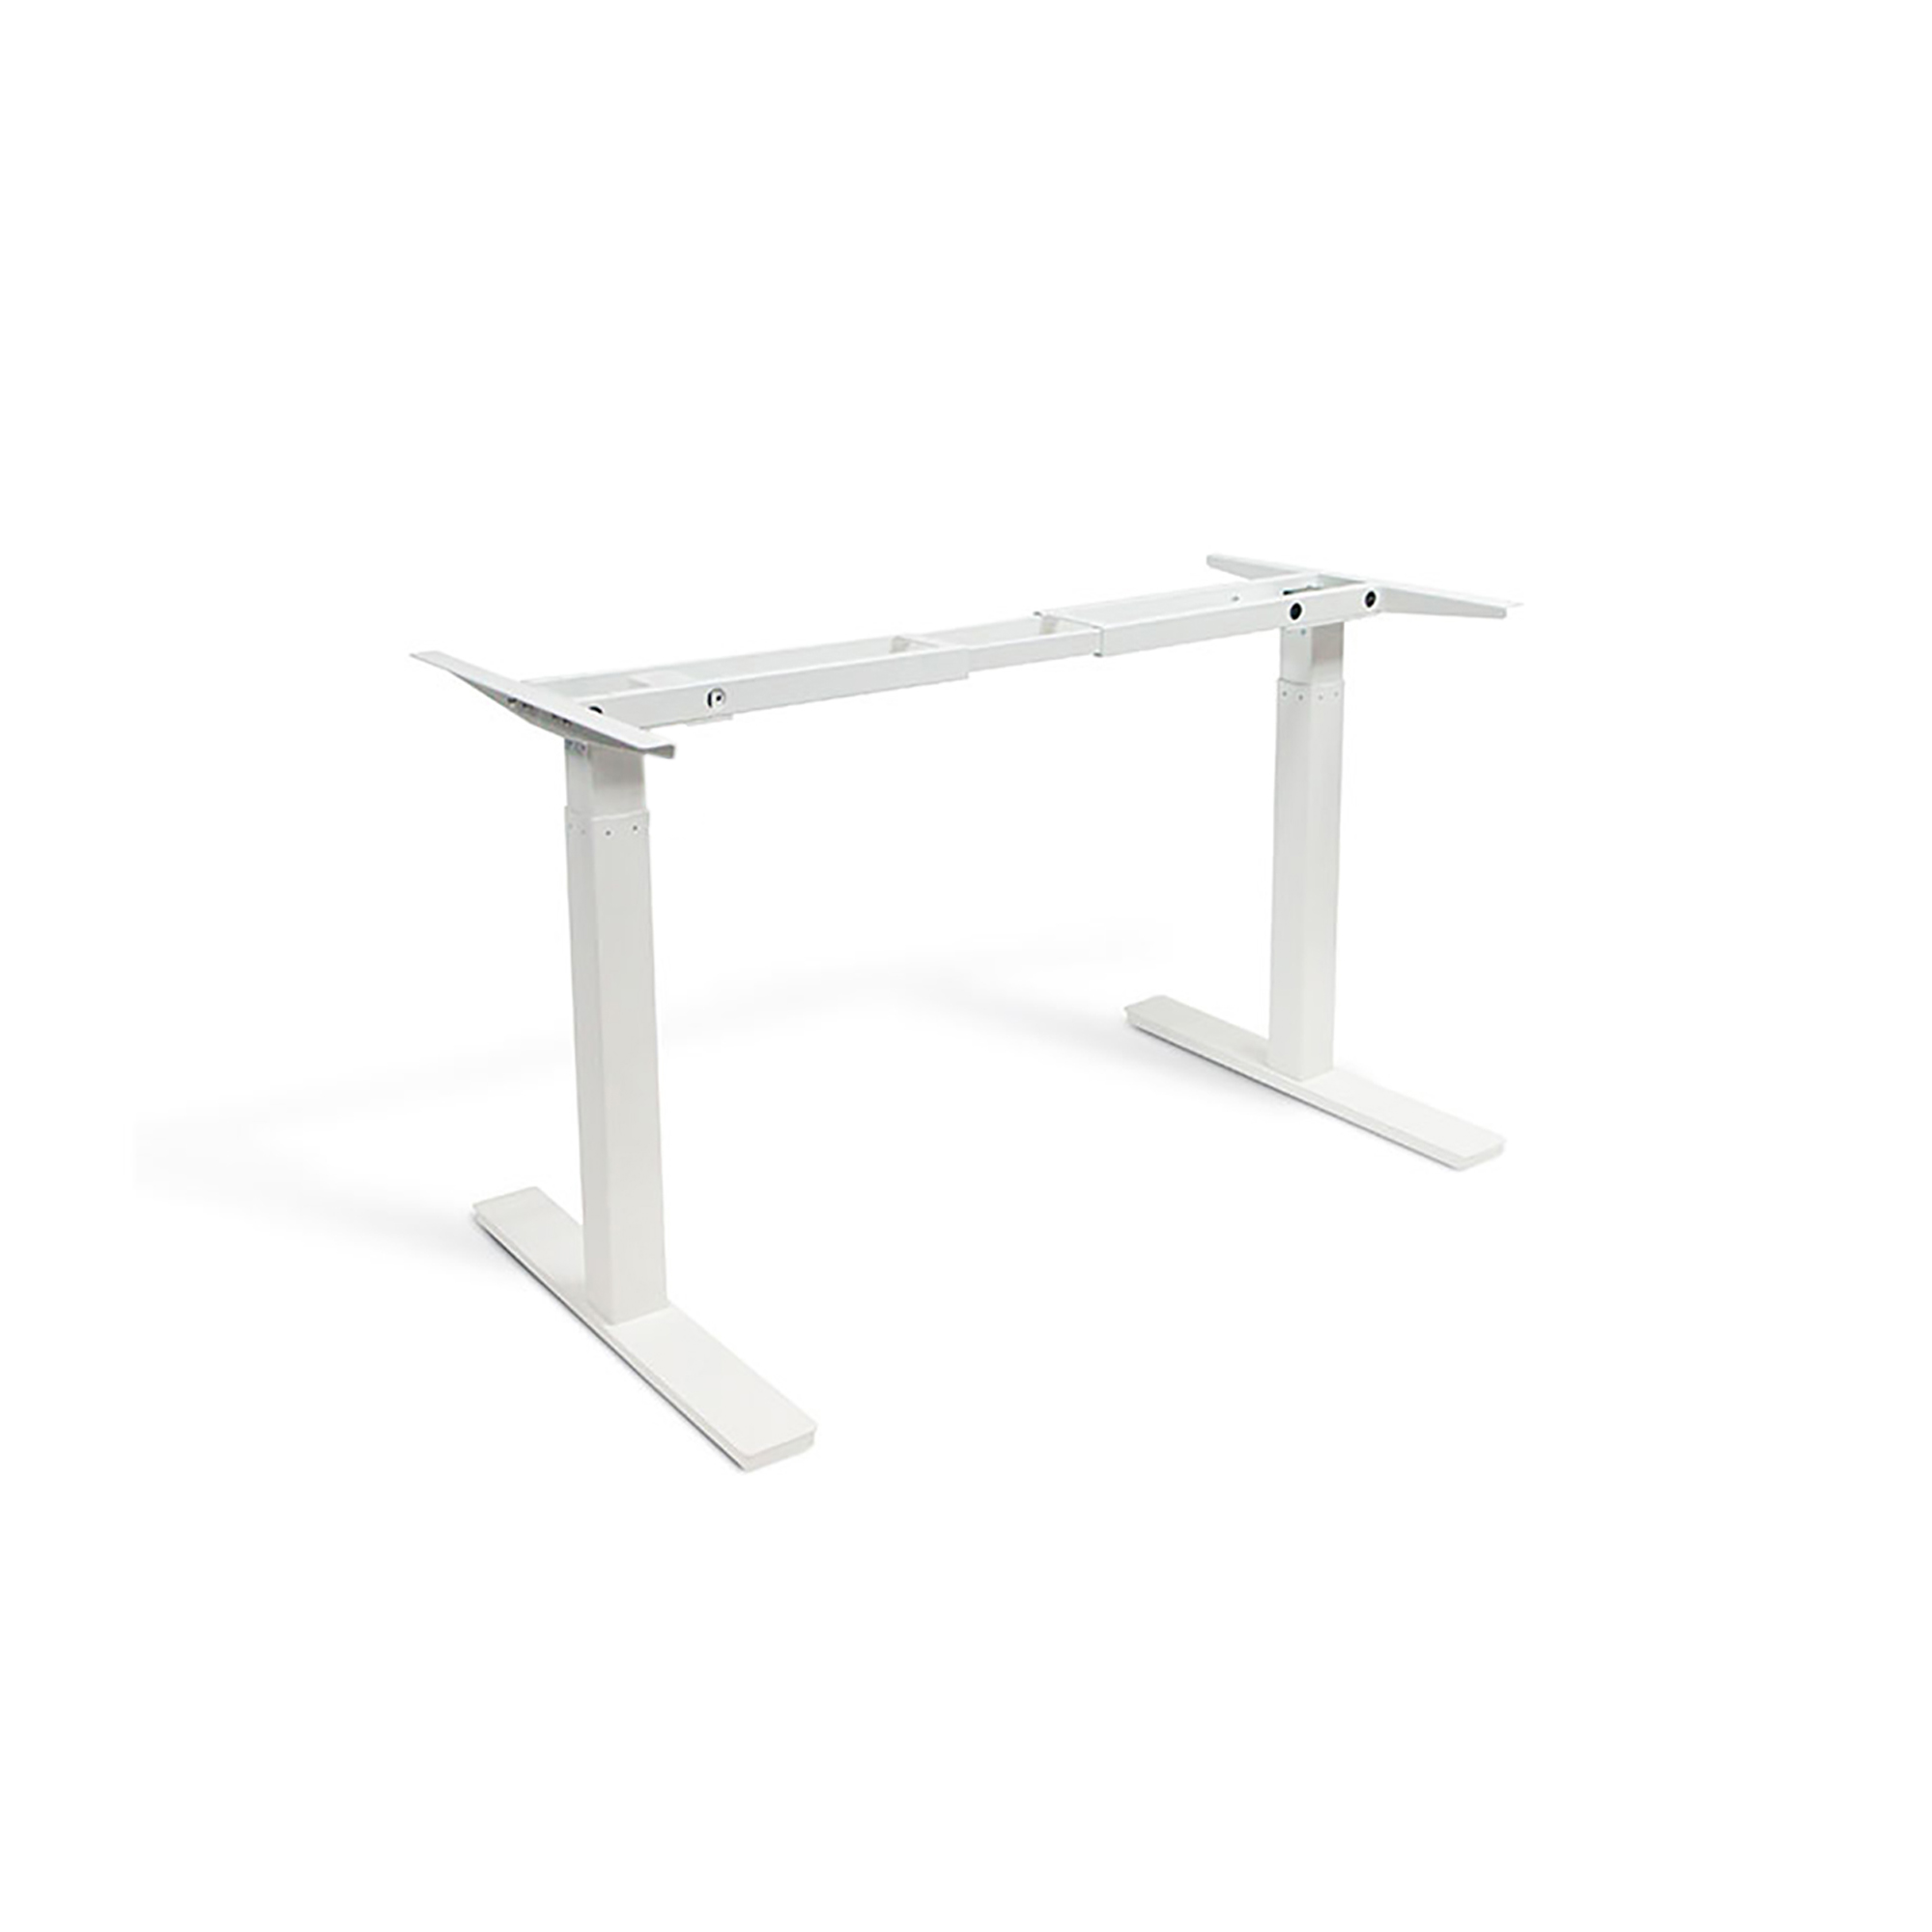 Autonomous A168 Edition Smart Hybrid Dual Motor Electric Standing Desk Frame in White (No Table Top), 28"-47" height range, 39"-